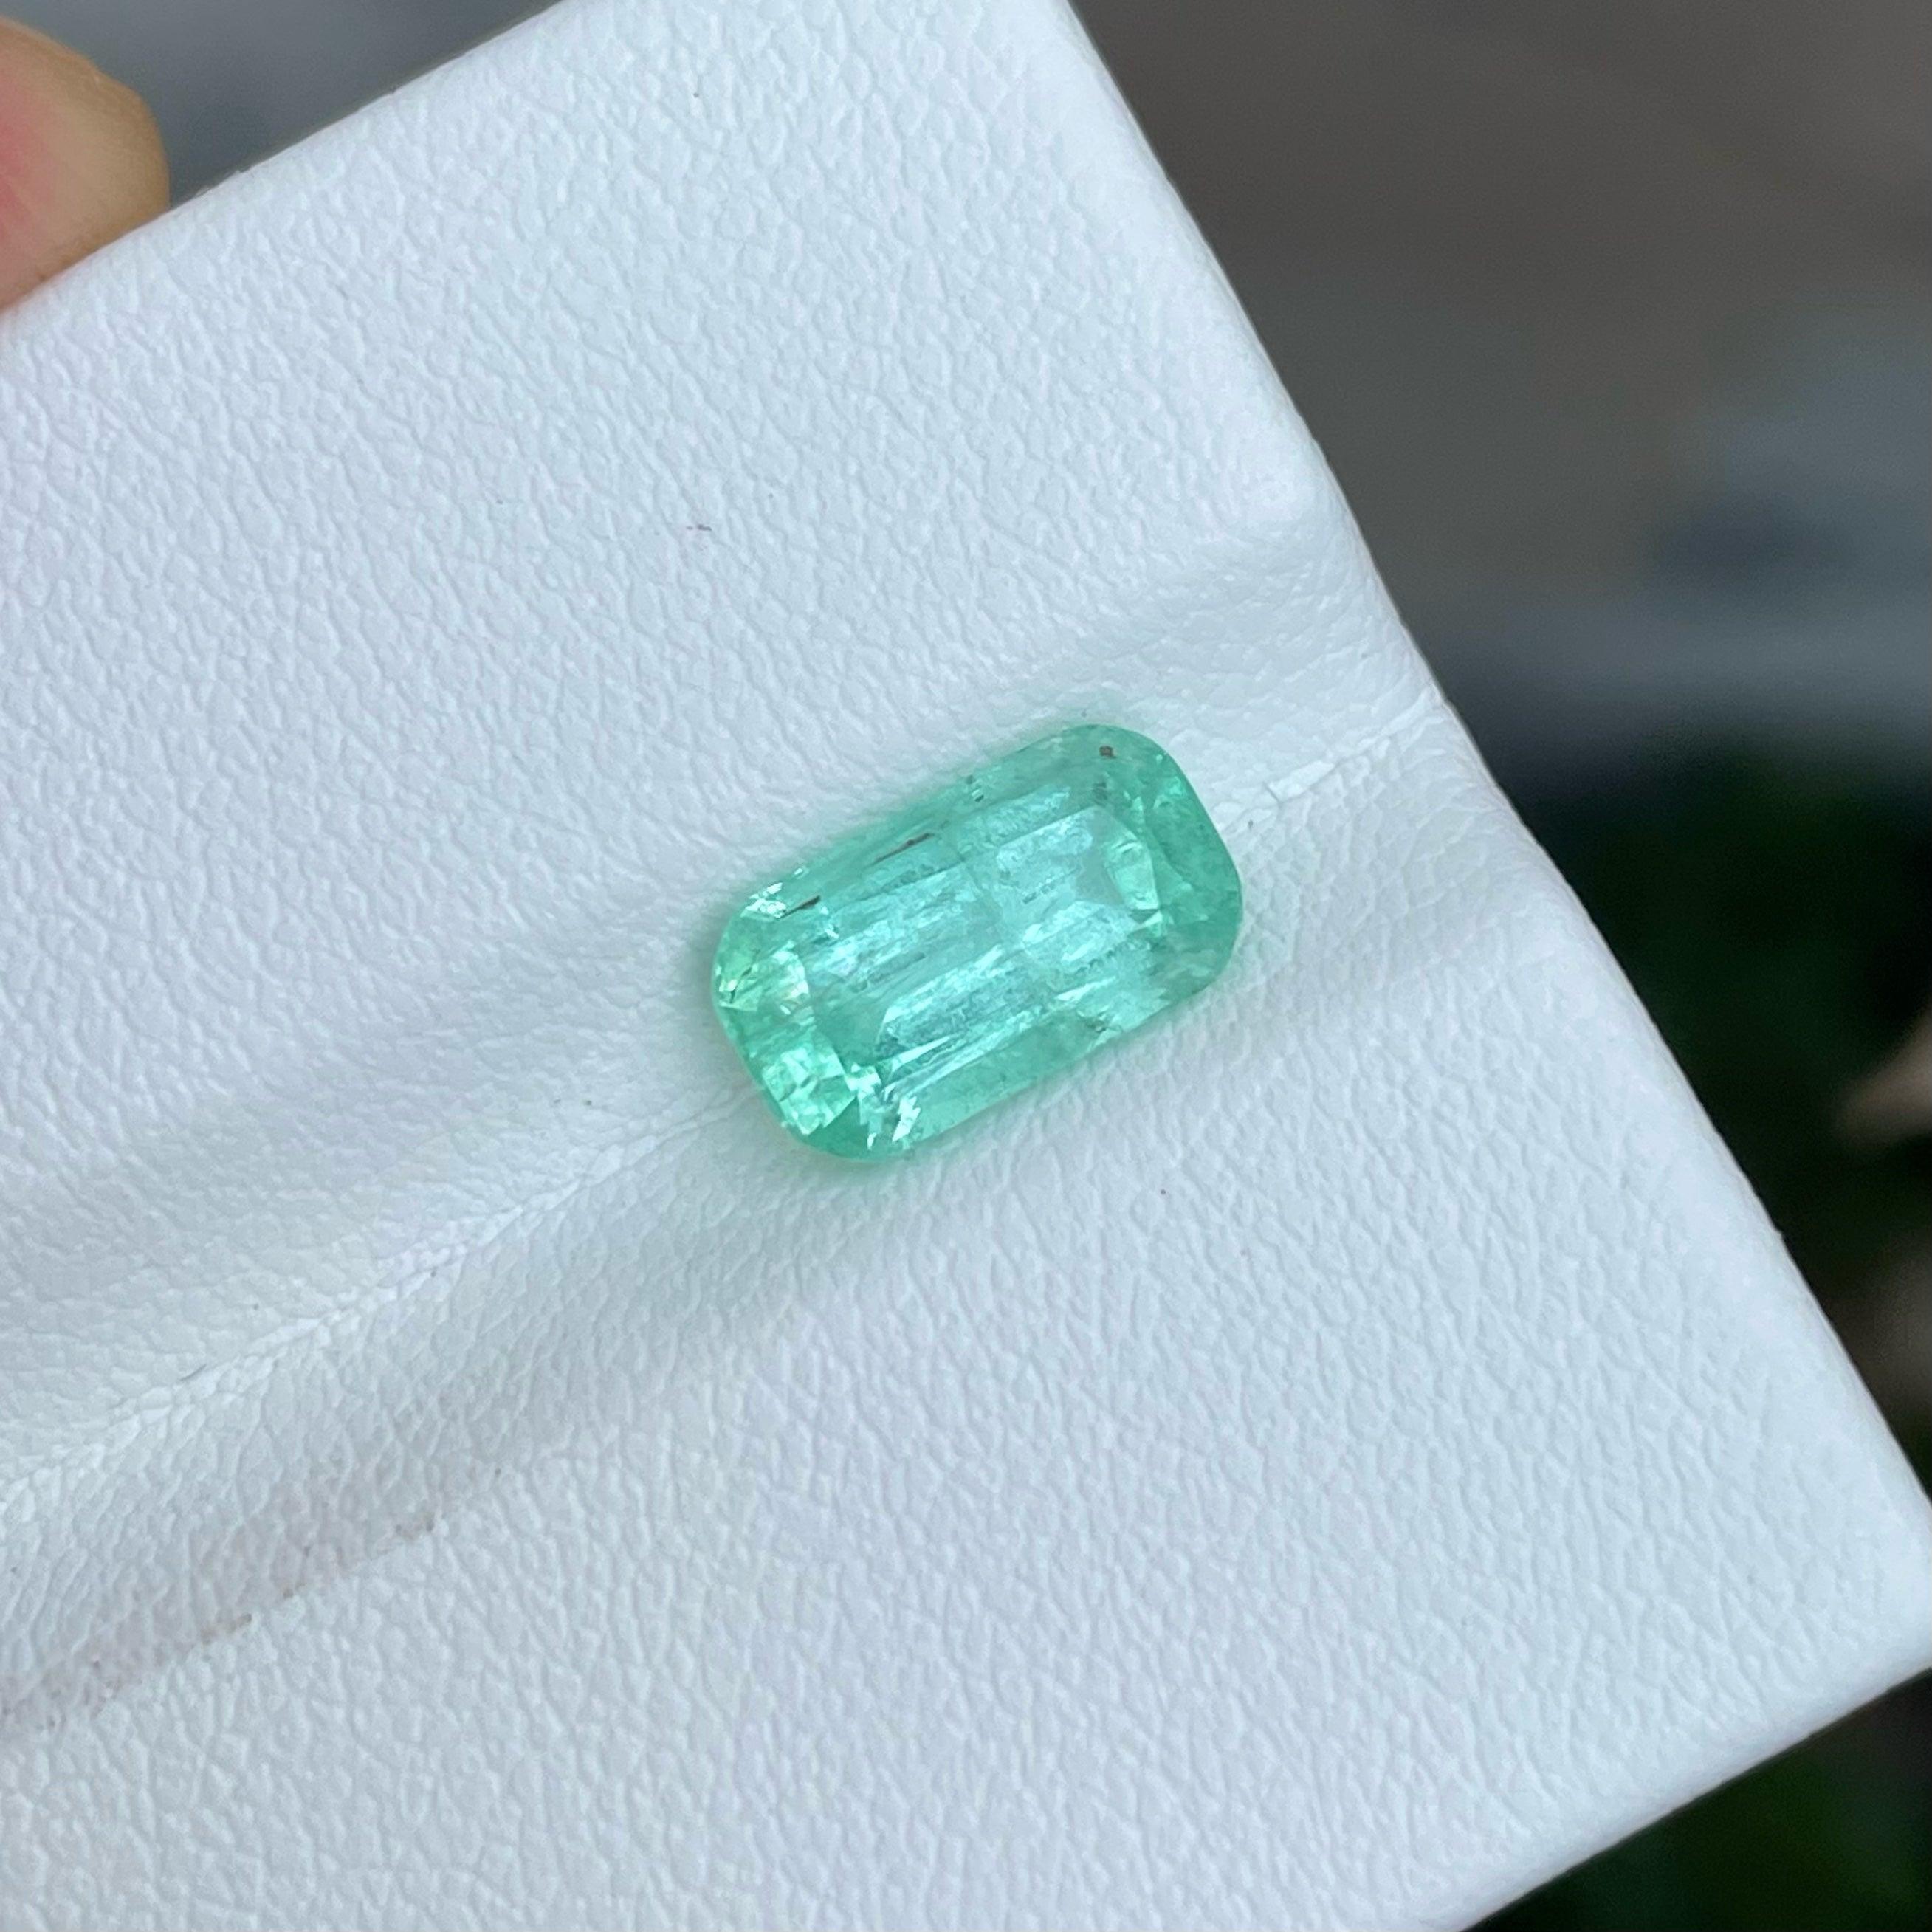 Exquisite Punjshir Emerald Gemstone of 2.35 carats from Punjshir,Afghanistan has a wonderful cut in a Cushion shape, incredible Light Green colour. Great brilliance. This gem is Included Clarity.

Product Information: 
GEMSTONE:	Exquisite Punjshir